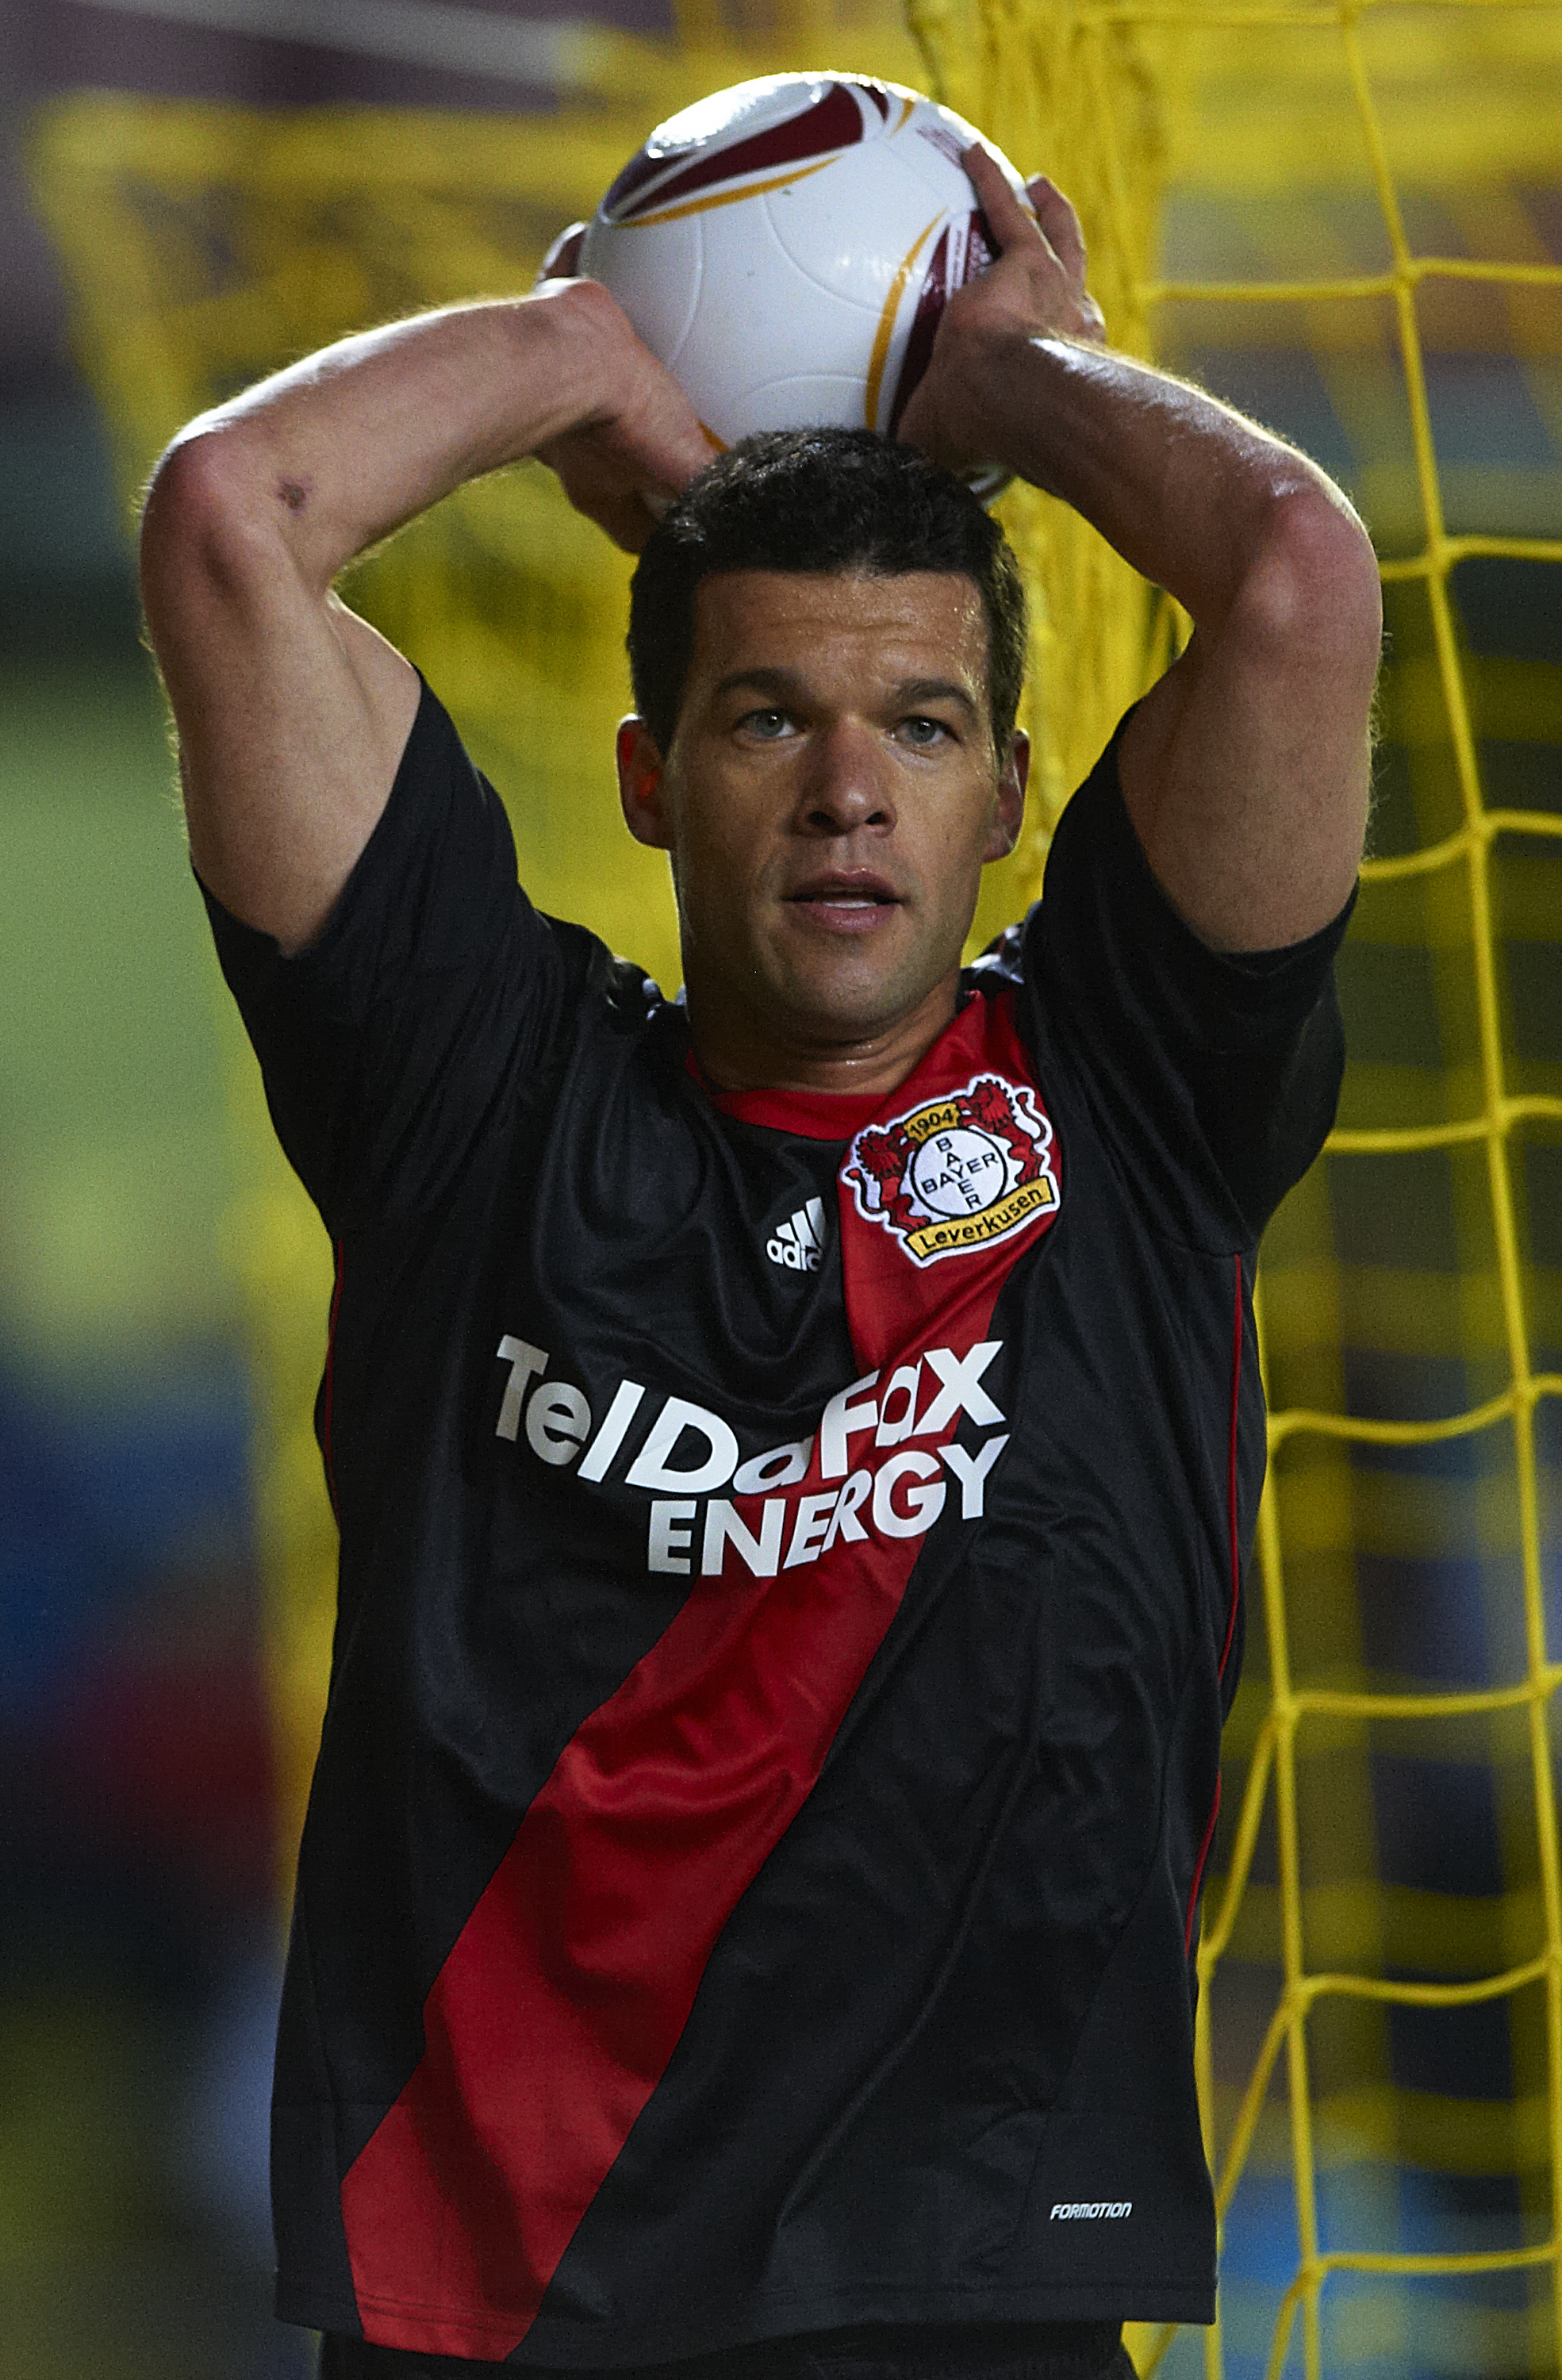 VILLARREAL, SPAIN - MARCH 17:  Michael Ballack of Bayer Leverkusen in action during the UEFA Europa League round of 16 second leg match between Villarreal and Bayer Leverkusen at El Madrigal stadium on March 17, 2011 in Villarreal, Spain.  (Photo by Manue